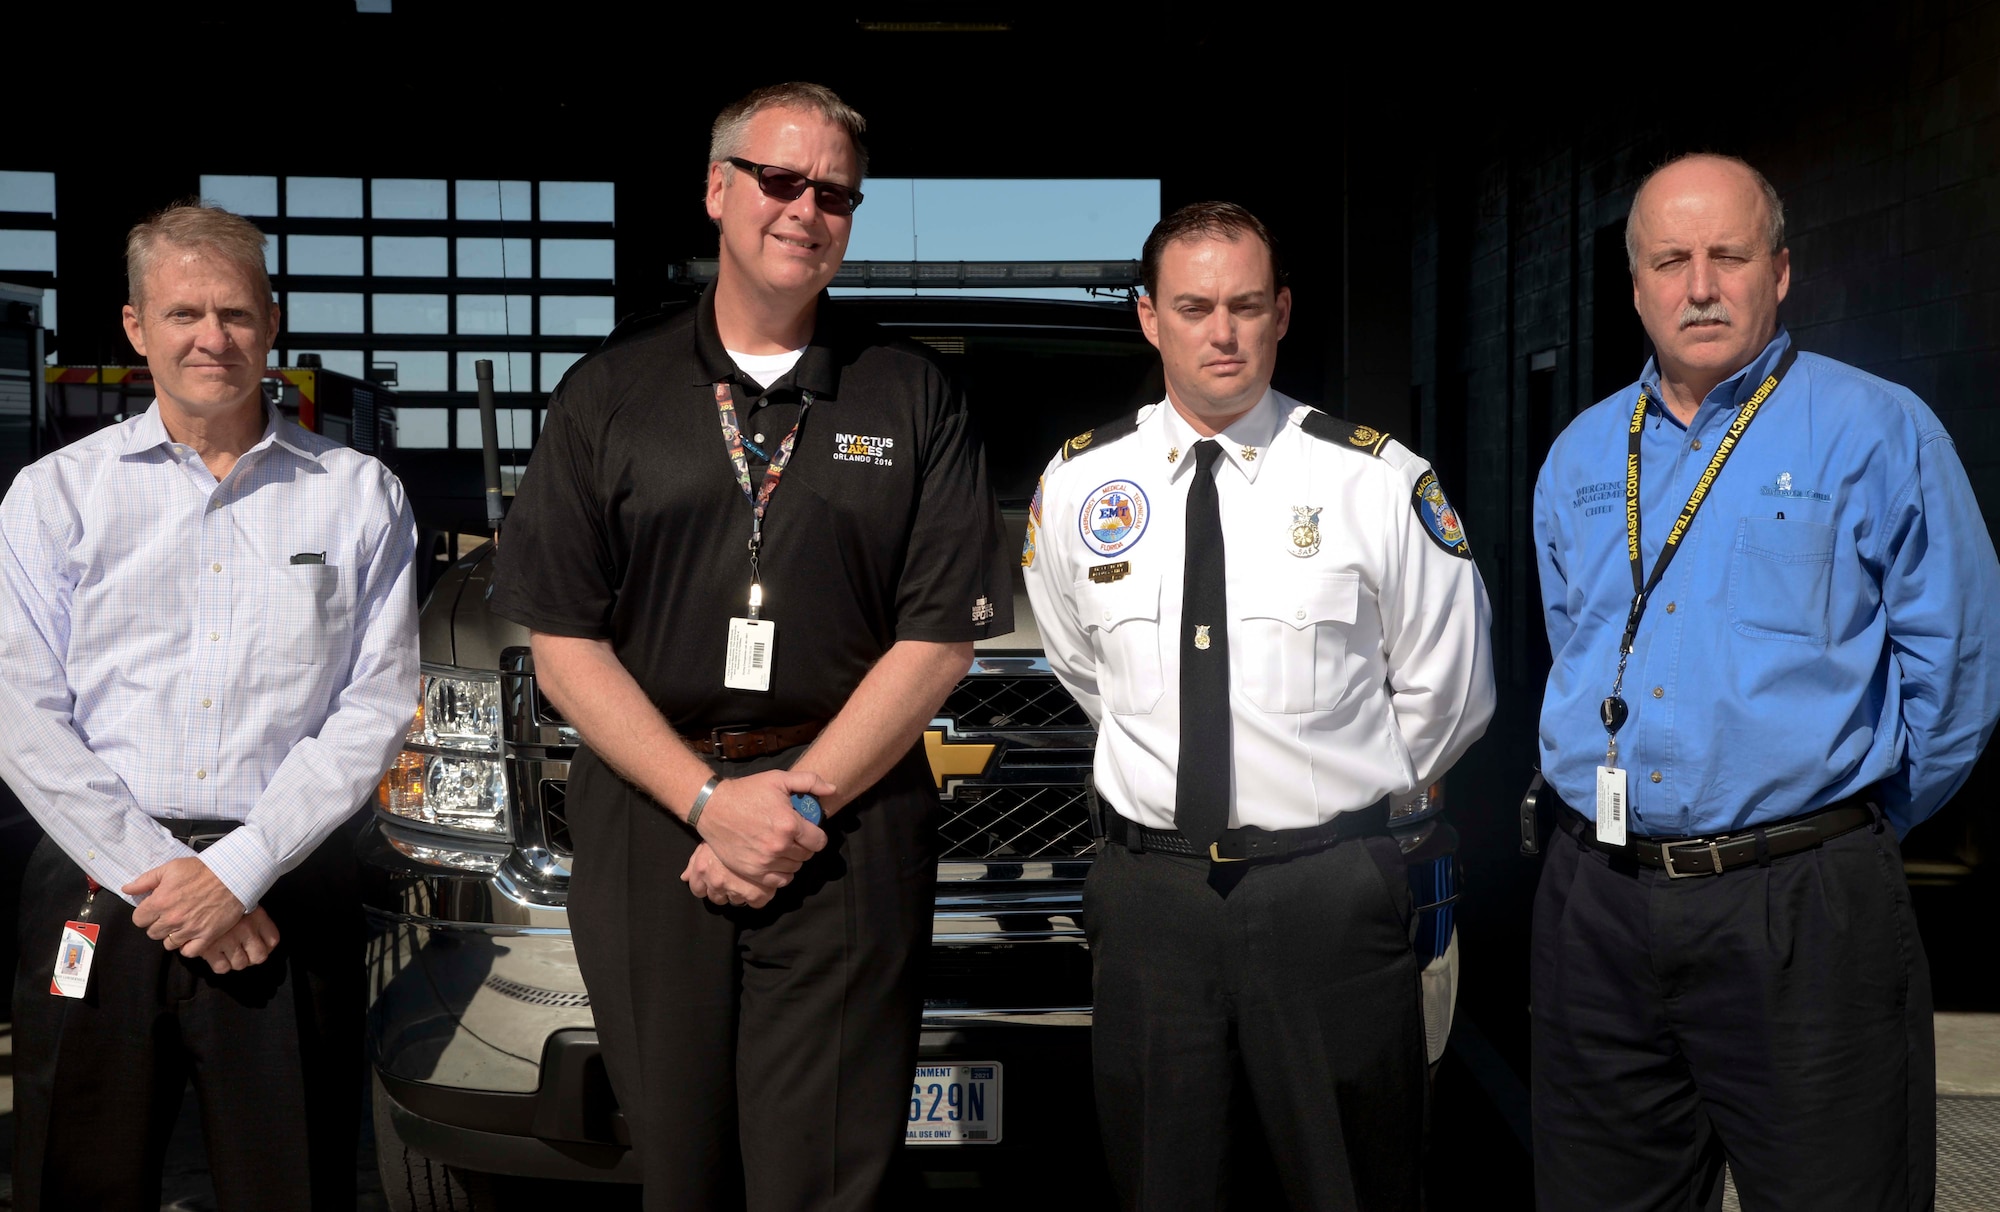 Members of the Sarasota Emergency Services (EMS) team pause for a photo with Matthew Amann, second from right, the deputy fire chief assigned to the 6th Civil Engineer Squadron, during a tour at MacDill Air Force Base, Fla., Dec. 2, 2016. The EMS team visited MacDill to view its command post and emergency services operations, as well as compare processes with Team MacDill’s.(U.S. Air Force photo by Senior Airman Vernon L. Fowler Jr.)